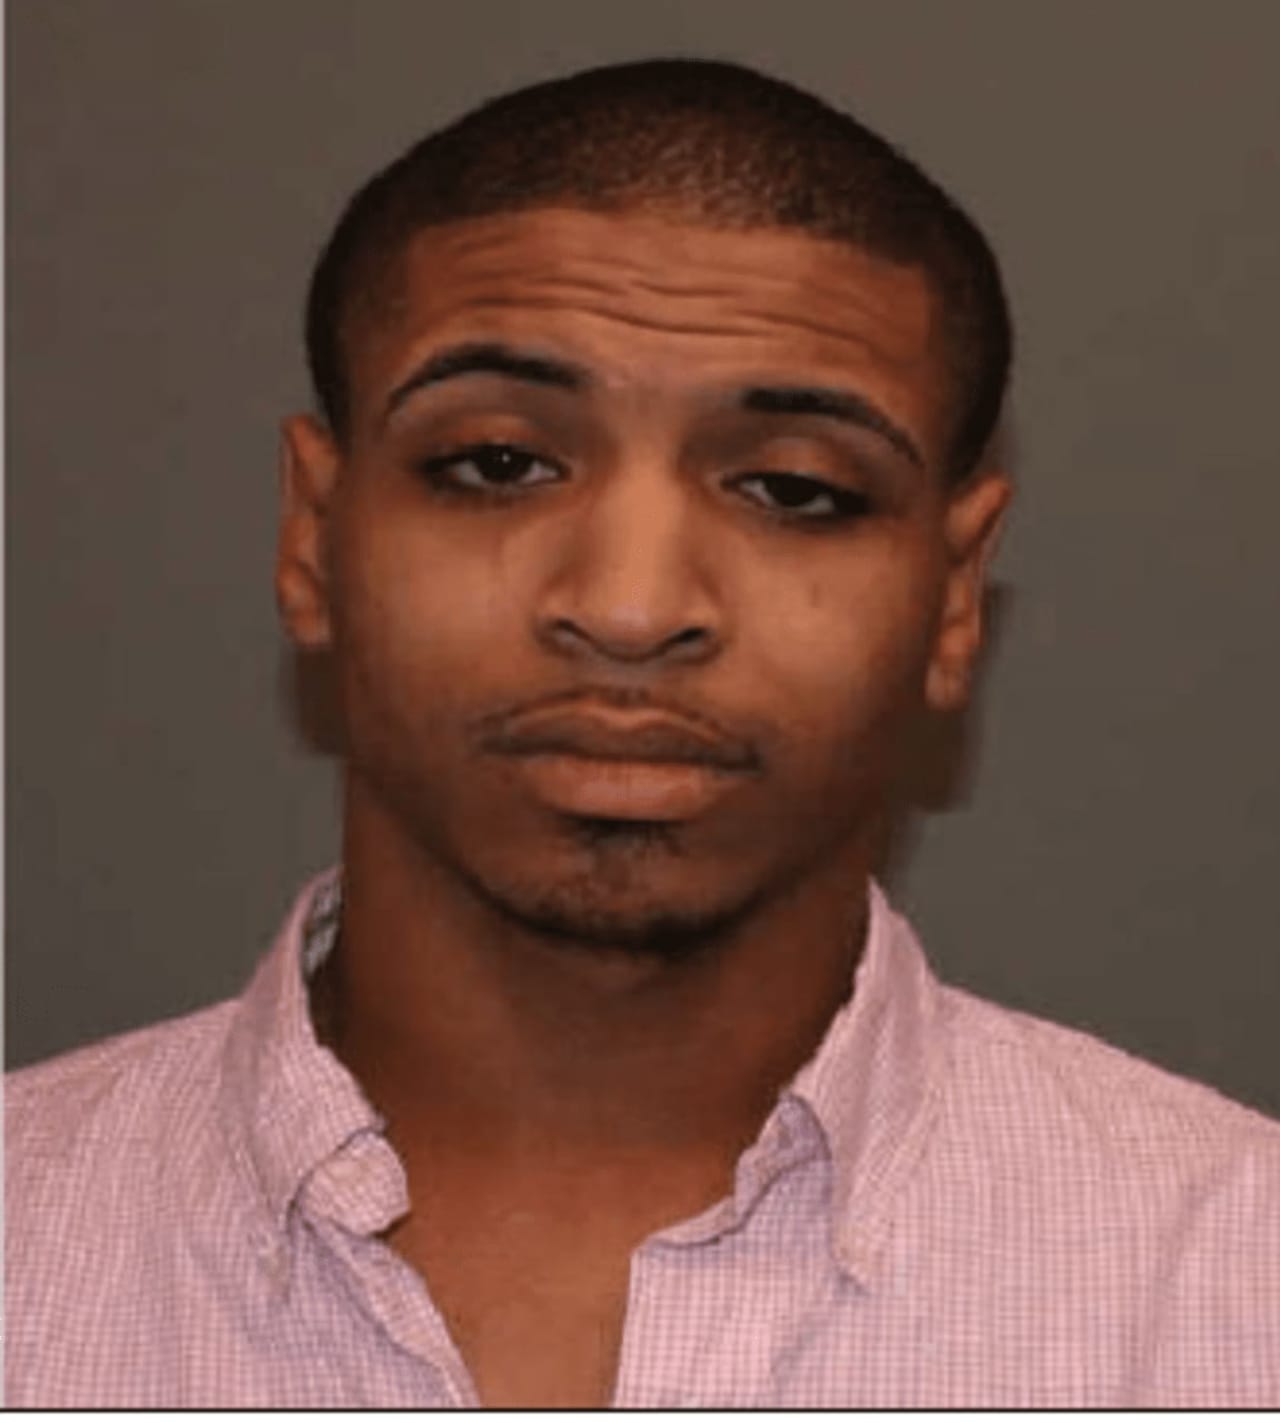 The Norwalk Police Department is asking for the public's help in locating Mykell Mitchell who is wanted in connection with a stabbing.